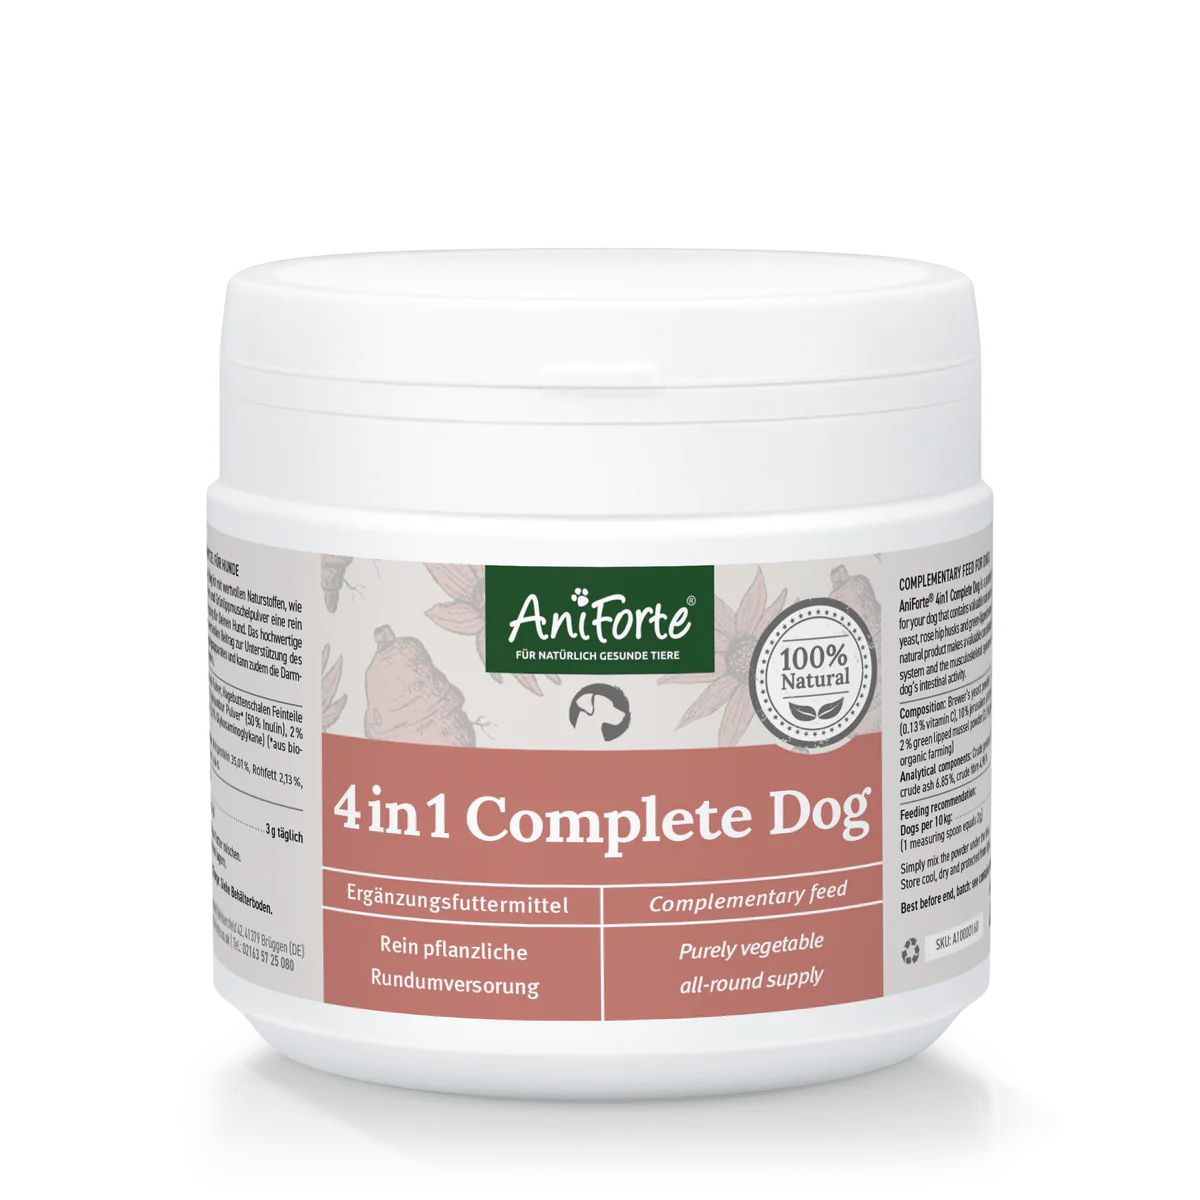 Aniforte 4in1 Complete for Dogs 250g - Advanced Health Supplement